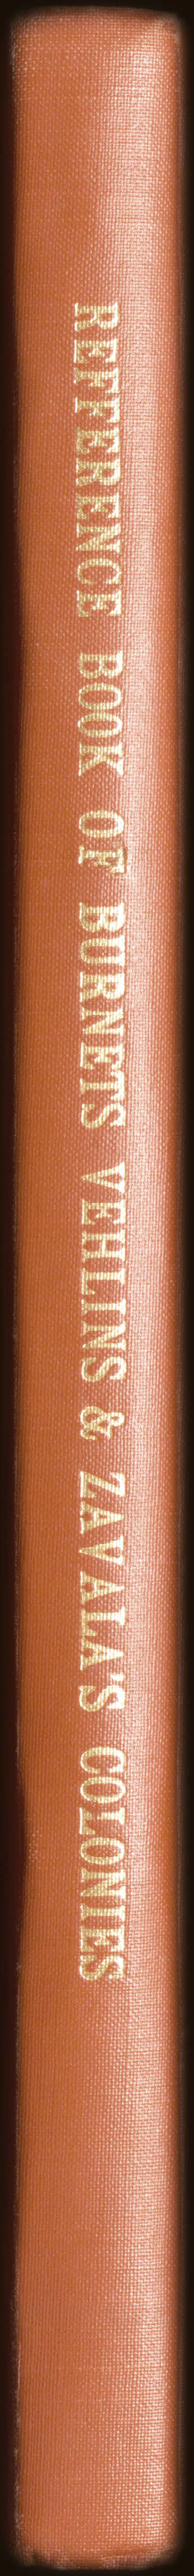 94554, Reference Book of Burnet's, [Vehlein's] & Zavala's Colonies, Historical Volumes